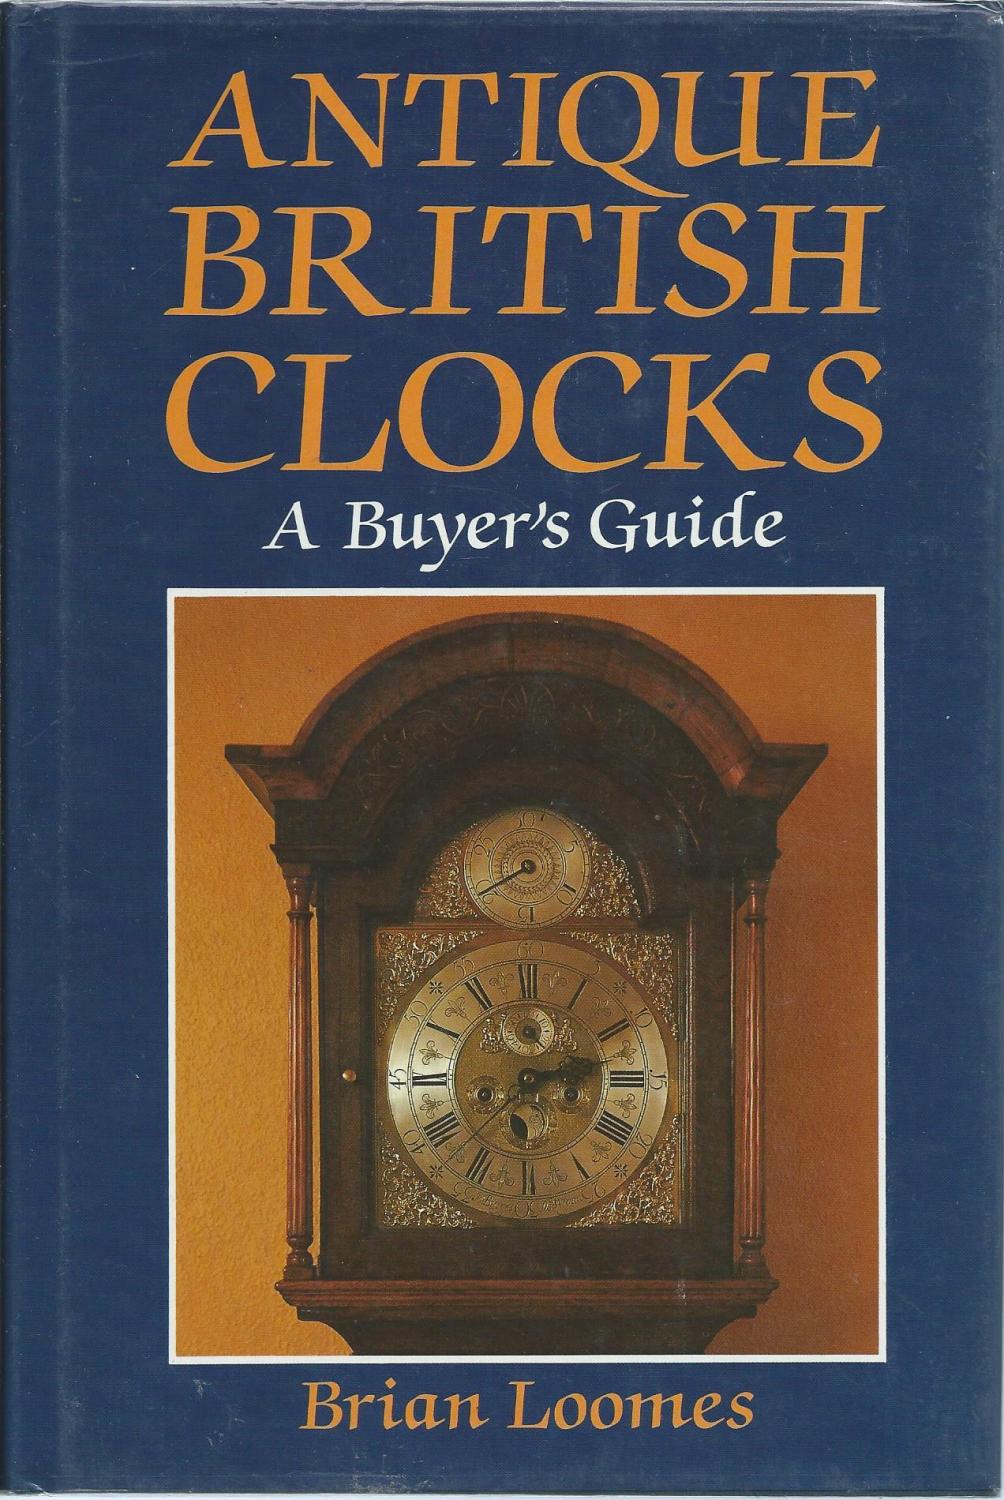 Antique British Clocks A Buyer's Guide by Loomes Brian: Near Fine ...